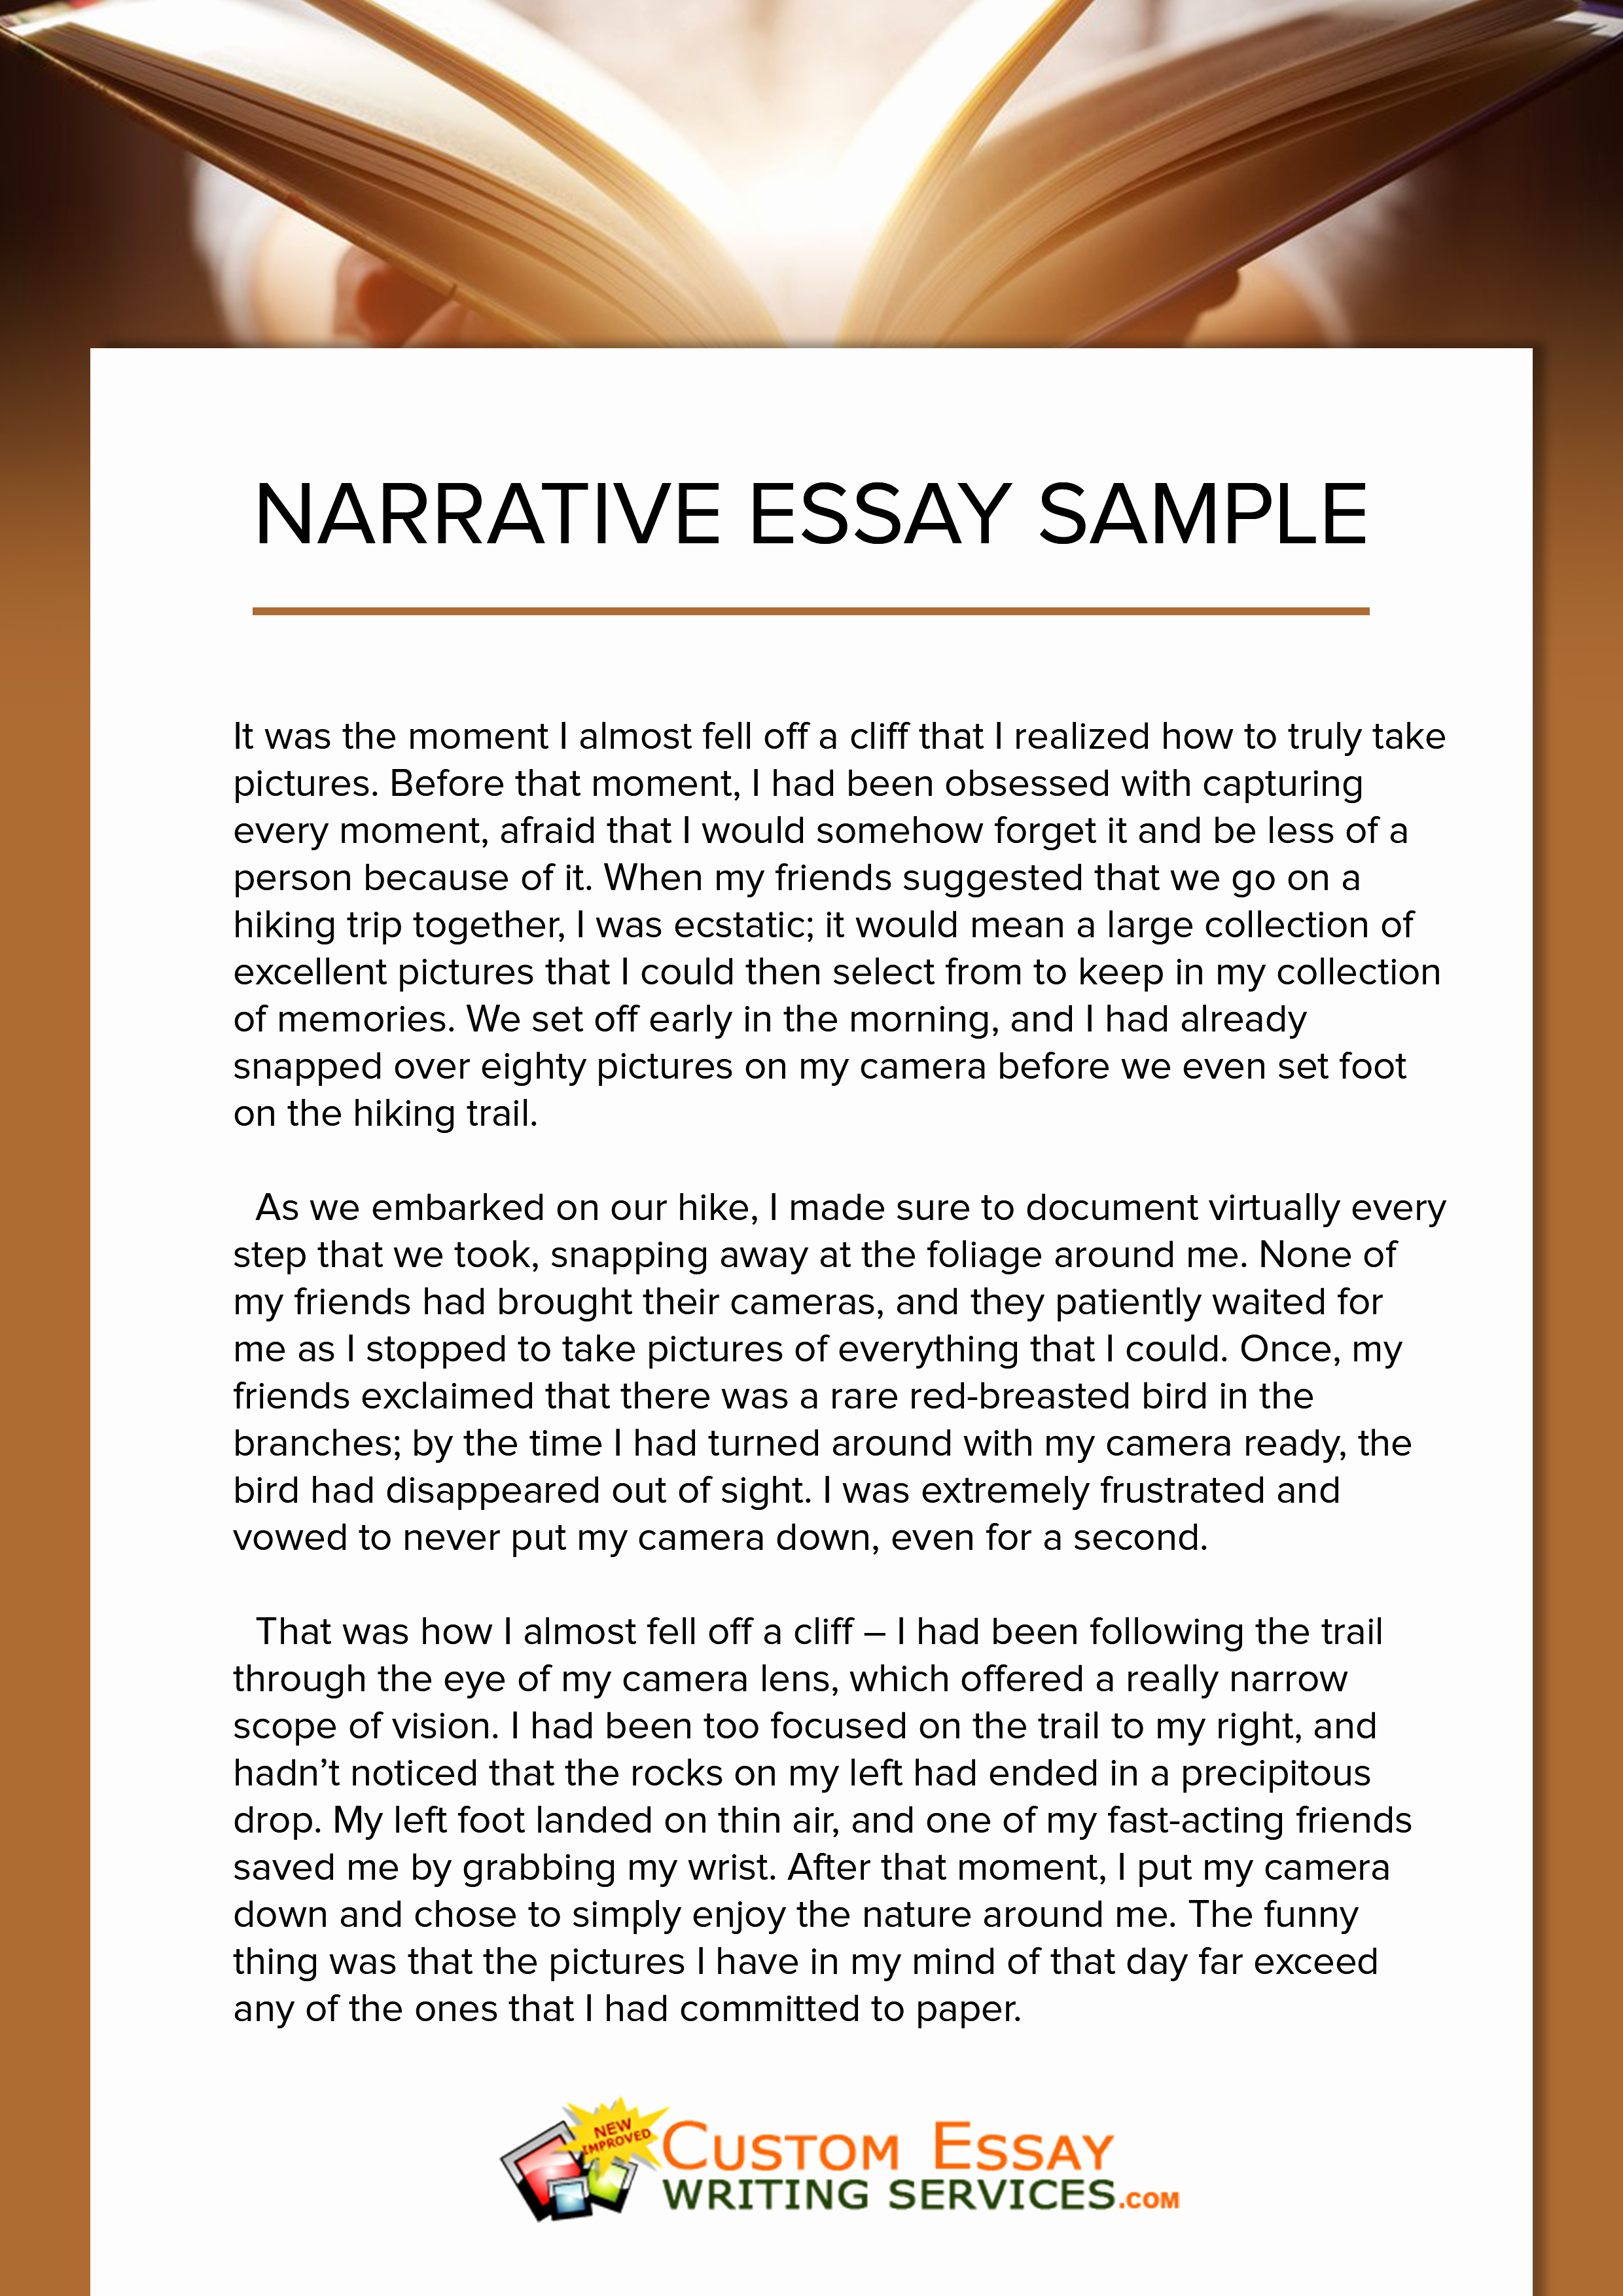 what are some examples of narrative essay